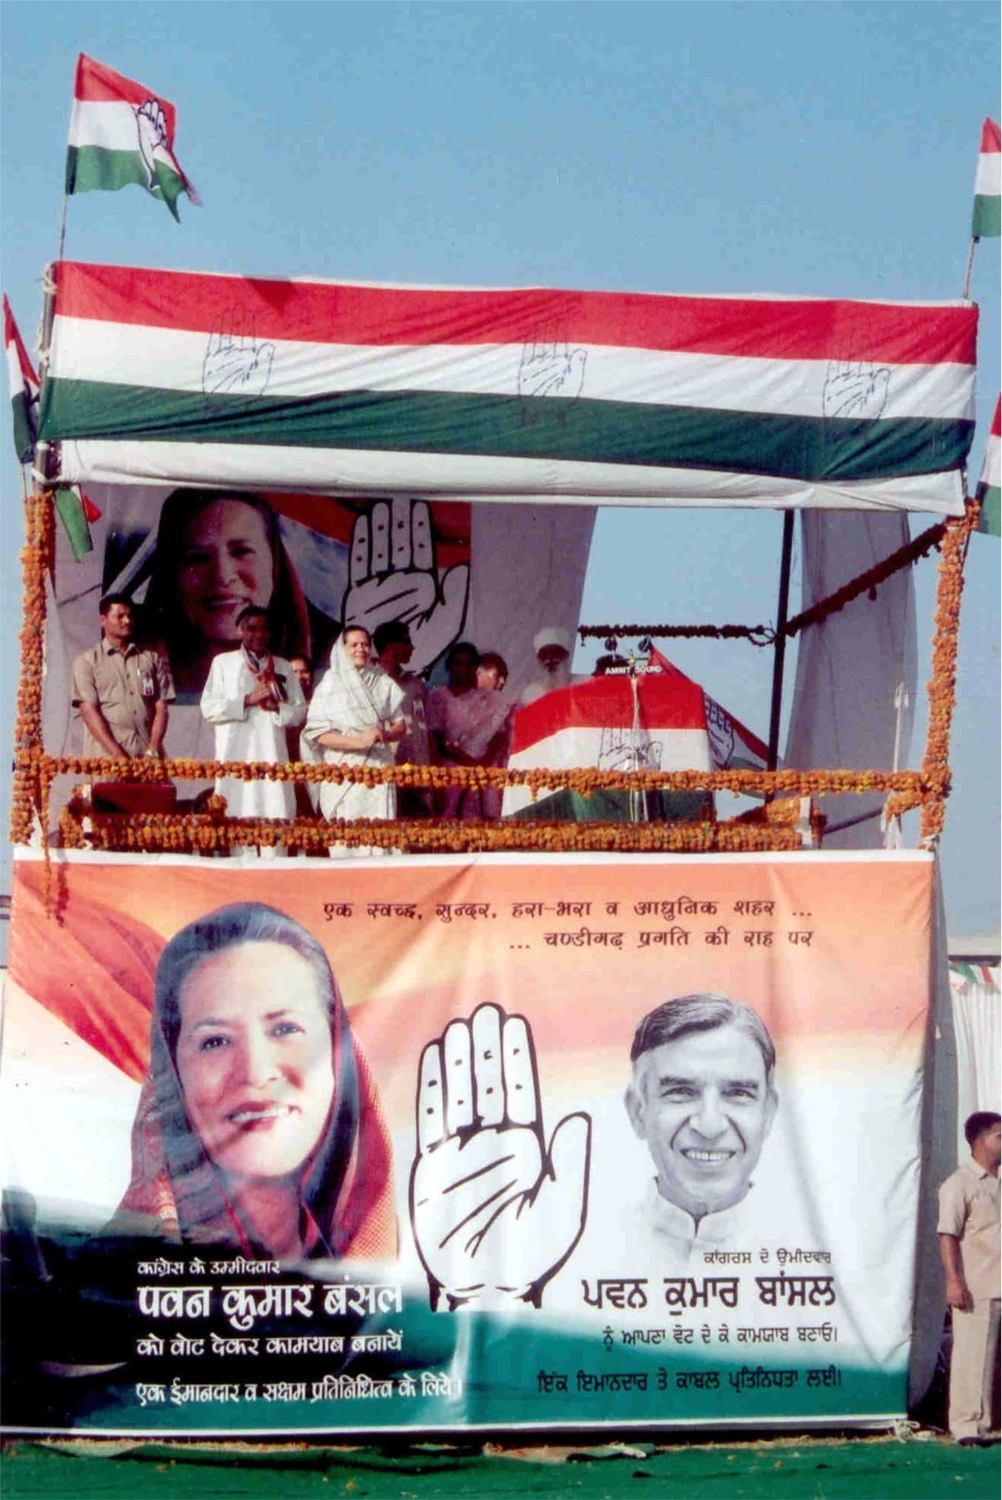 With Smt. Sonia Gandhi at Election Rally 2009